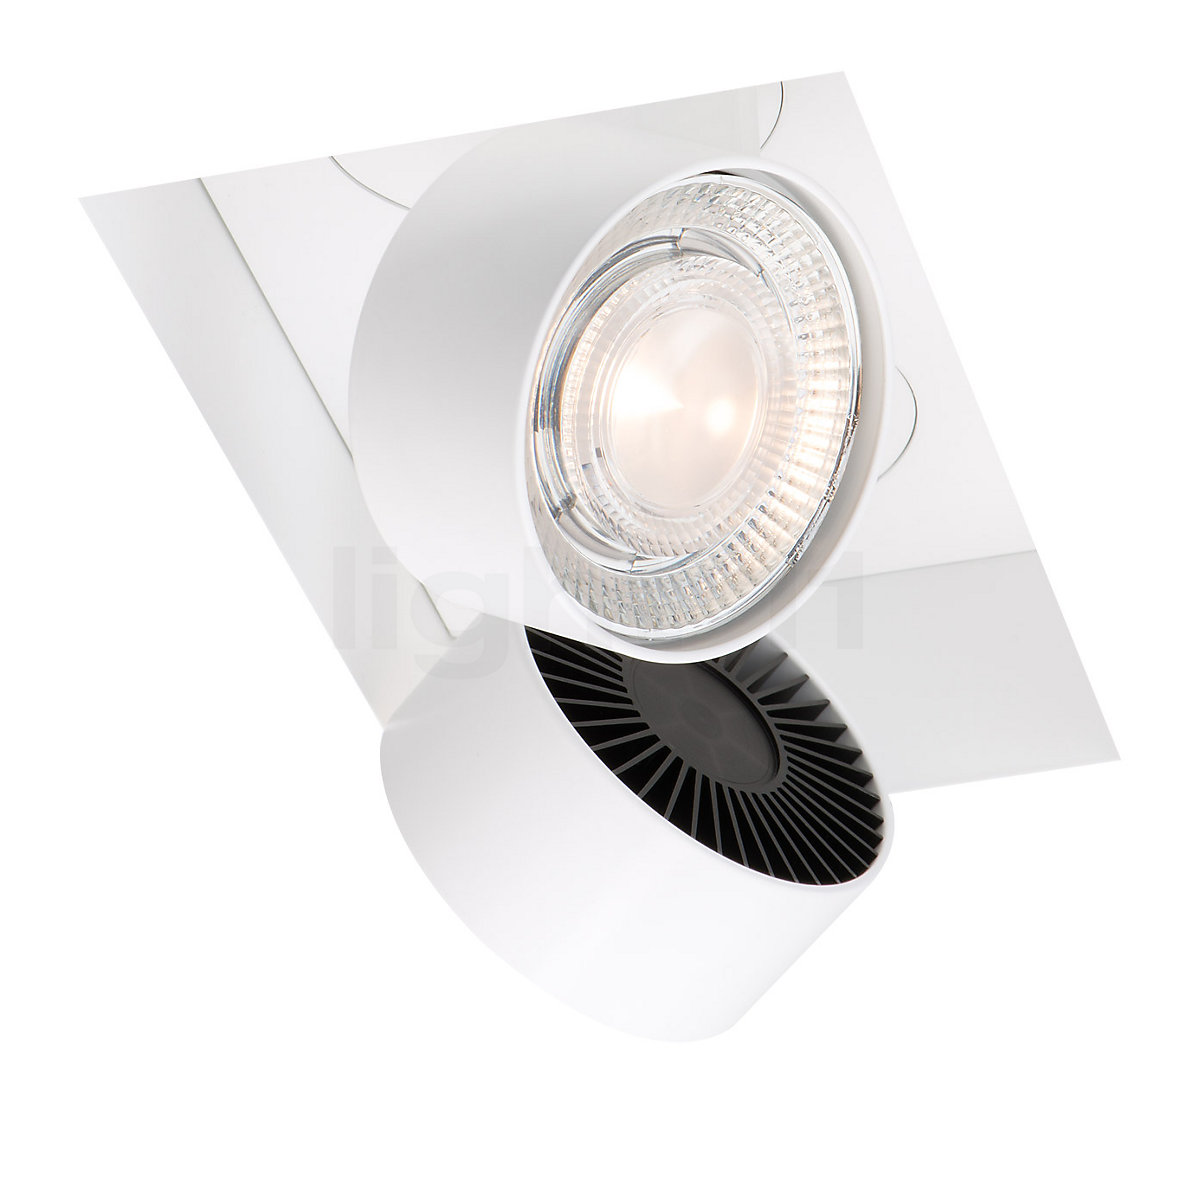 Indringing lucht Discipline Buy Mawa Wittenberg 4.0 recessed Ceiling Light angular flush with two spots  LED excl. transformer at